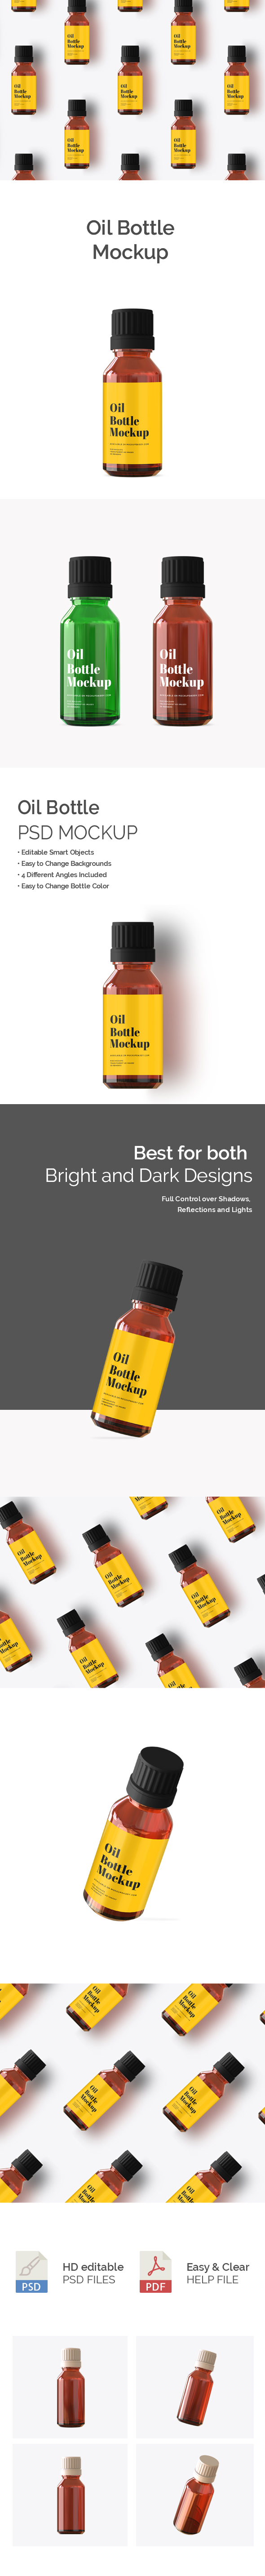 Brown Amber Mini Oil Bottle Mockup with black cap and yellow and transparent label.